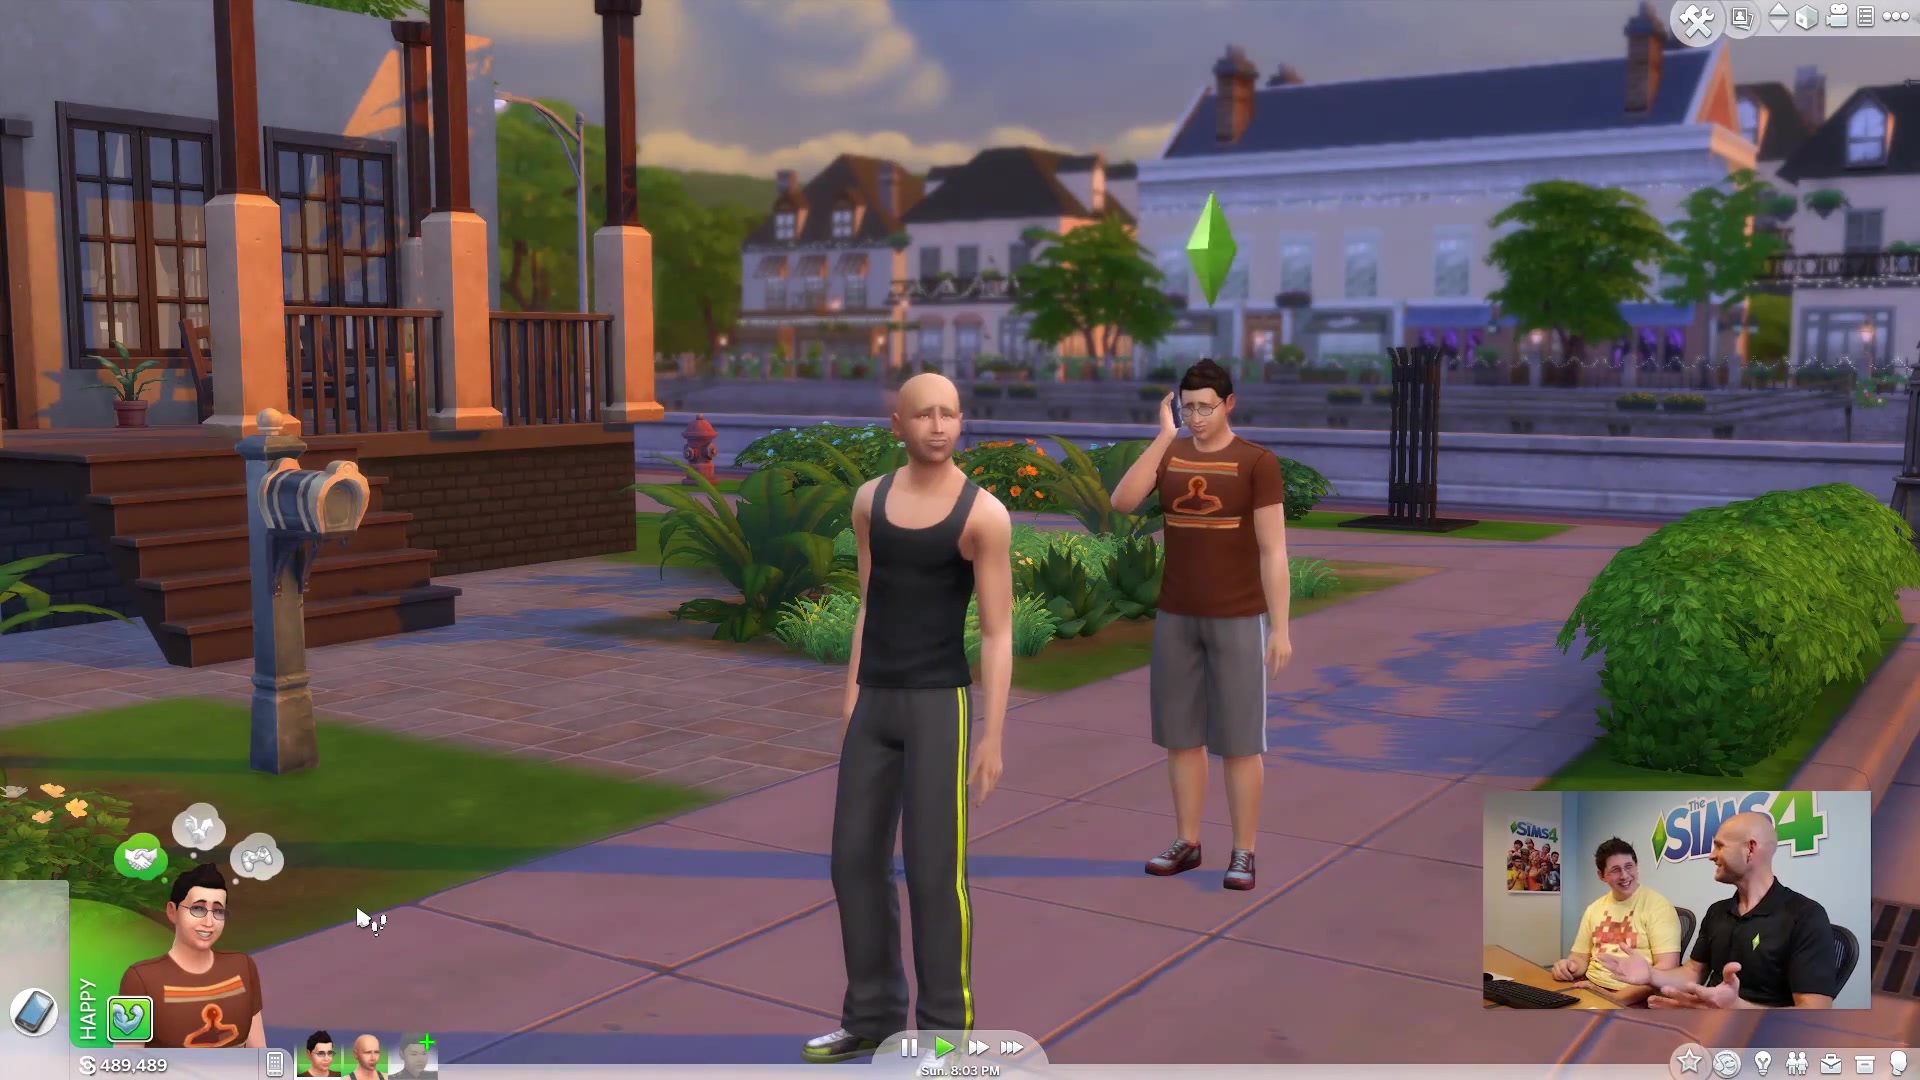 download sims 4 on laptop for free windows 10